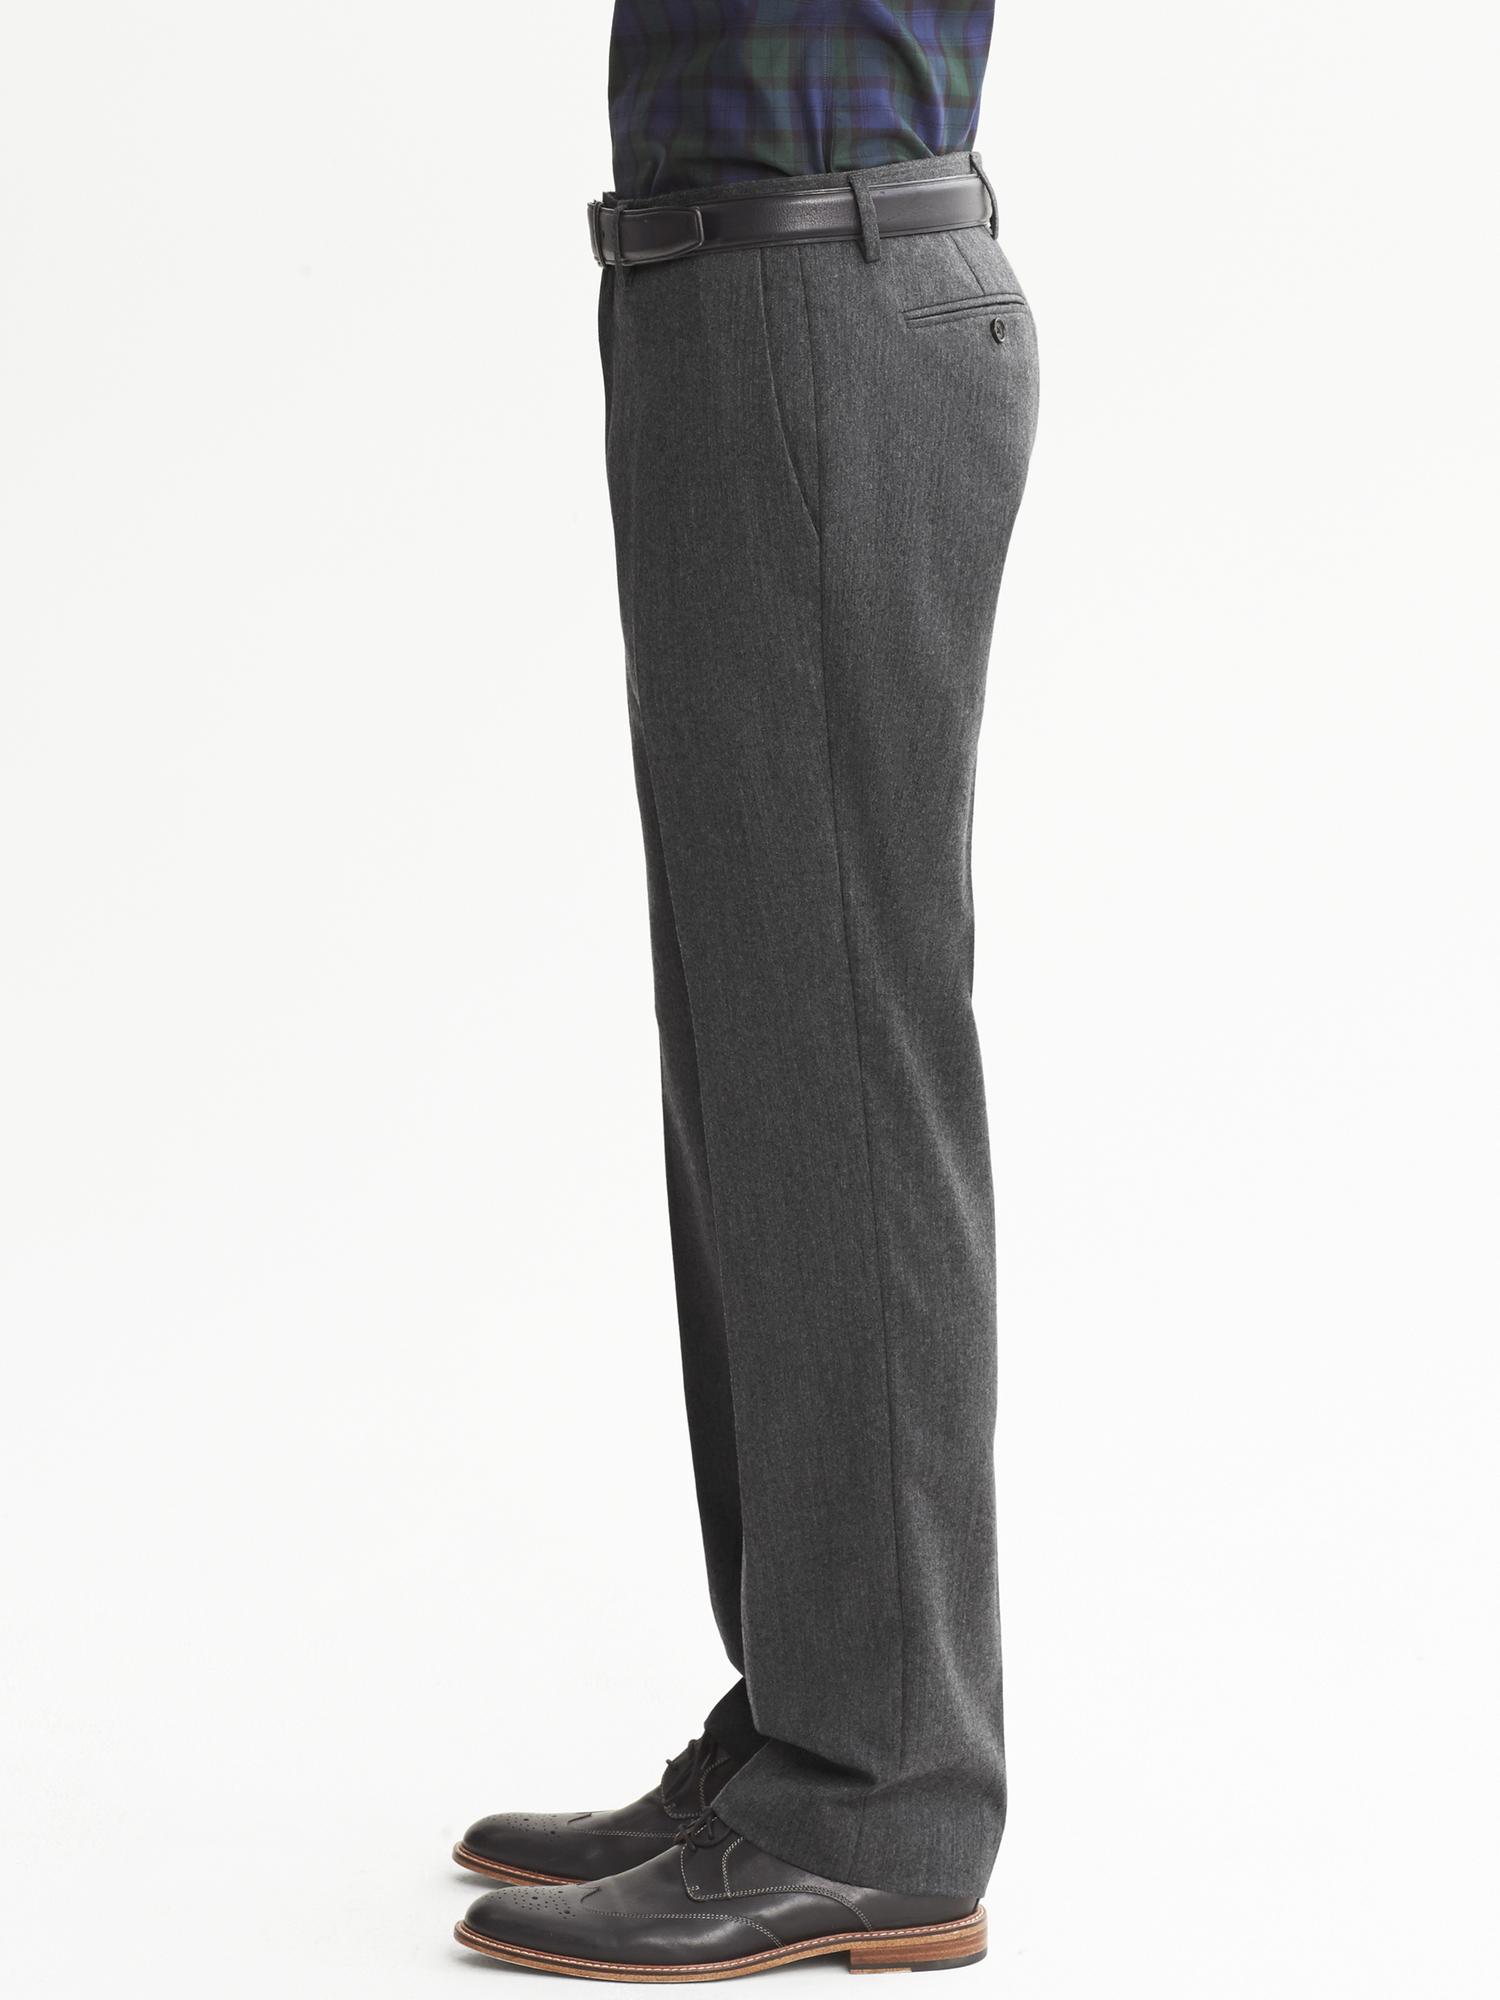 Tailored Slim-Fit Flannel Pant